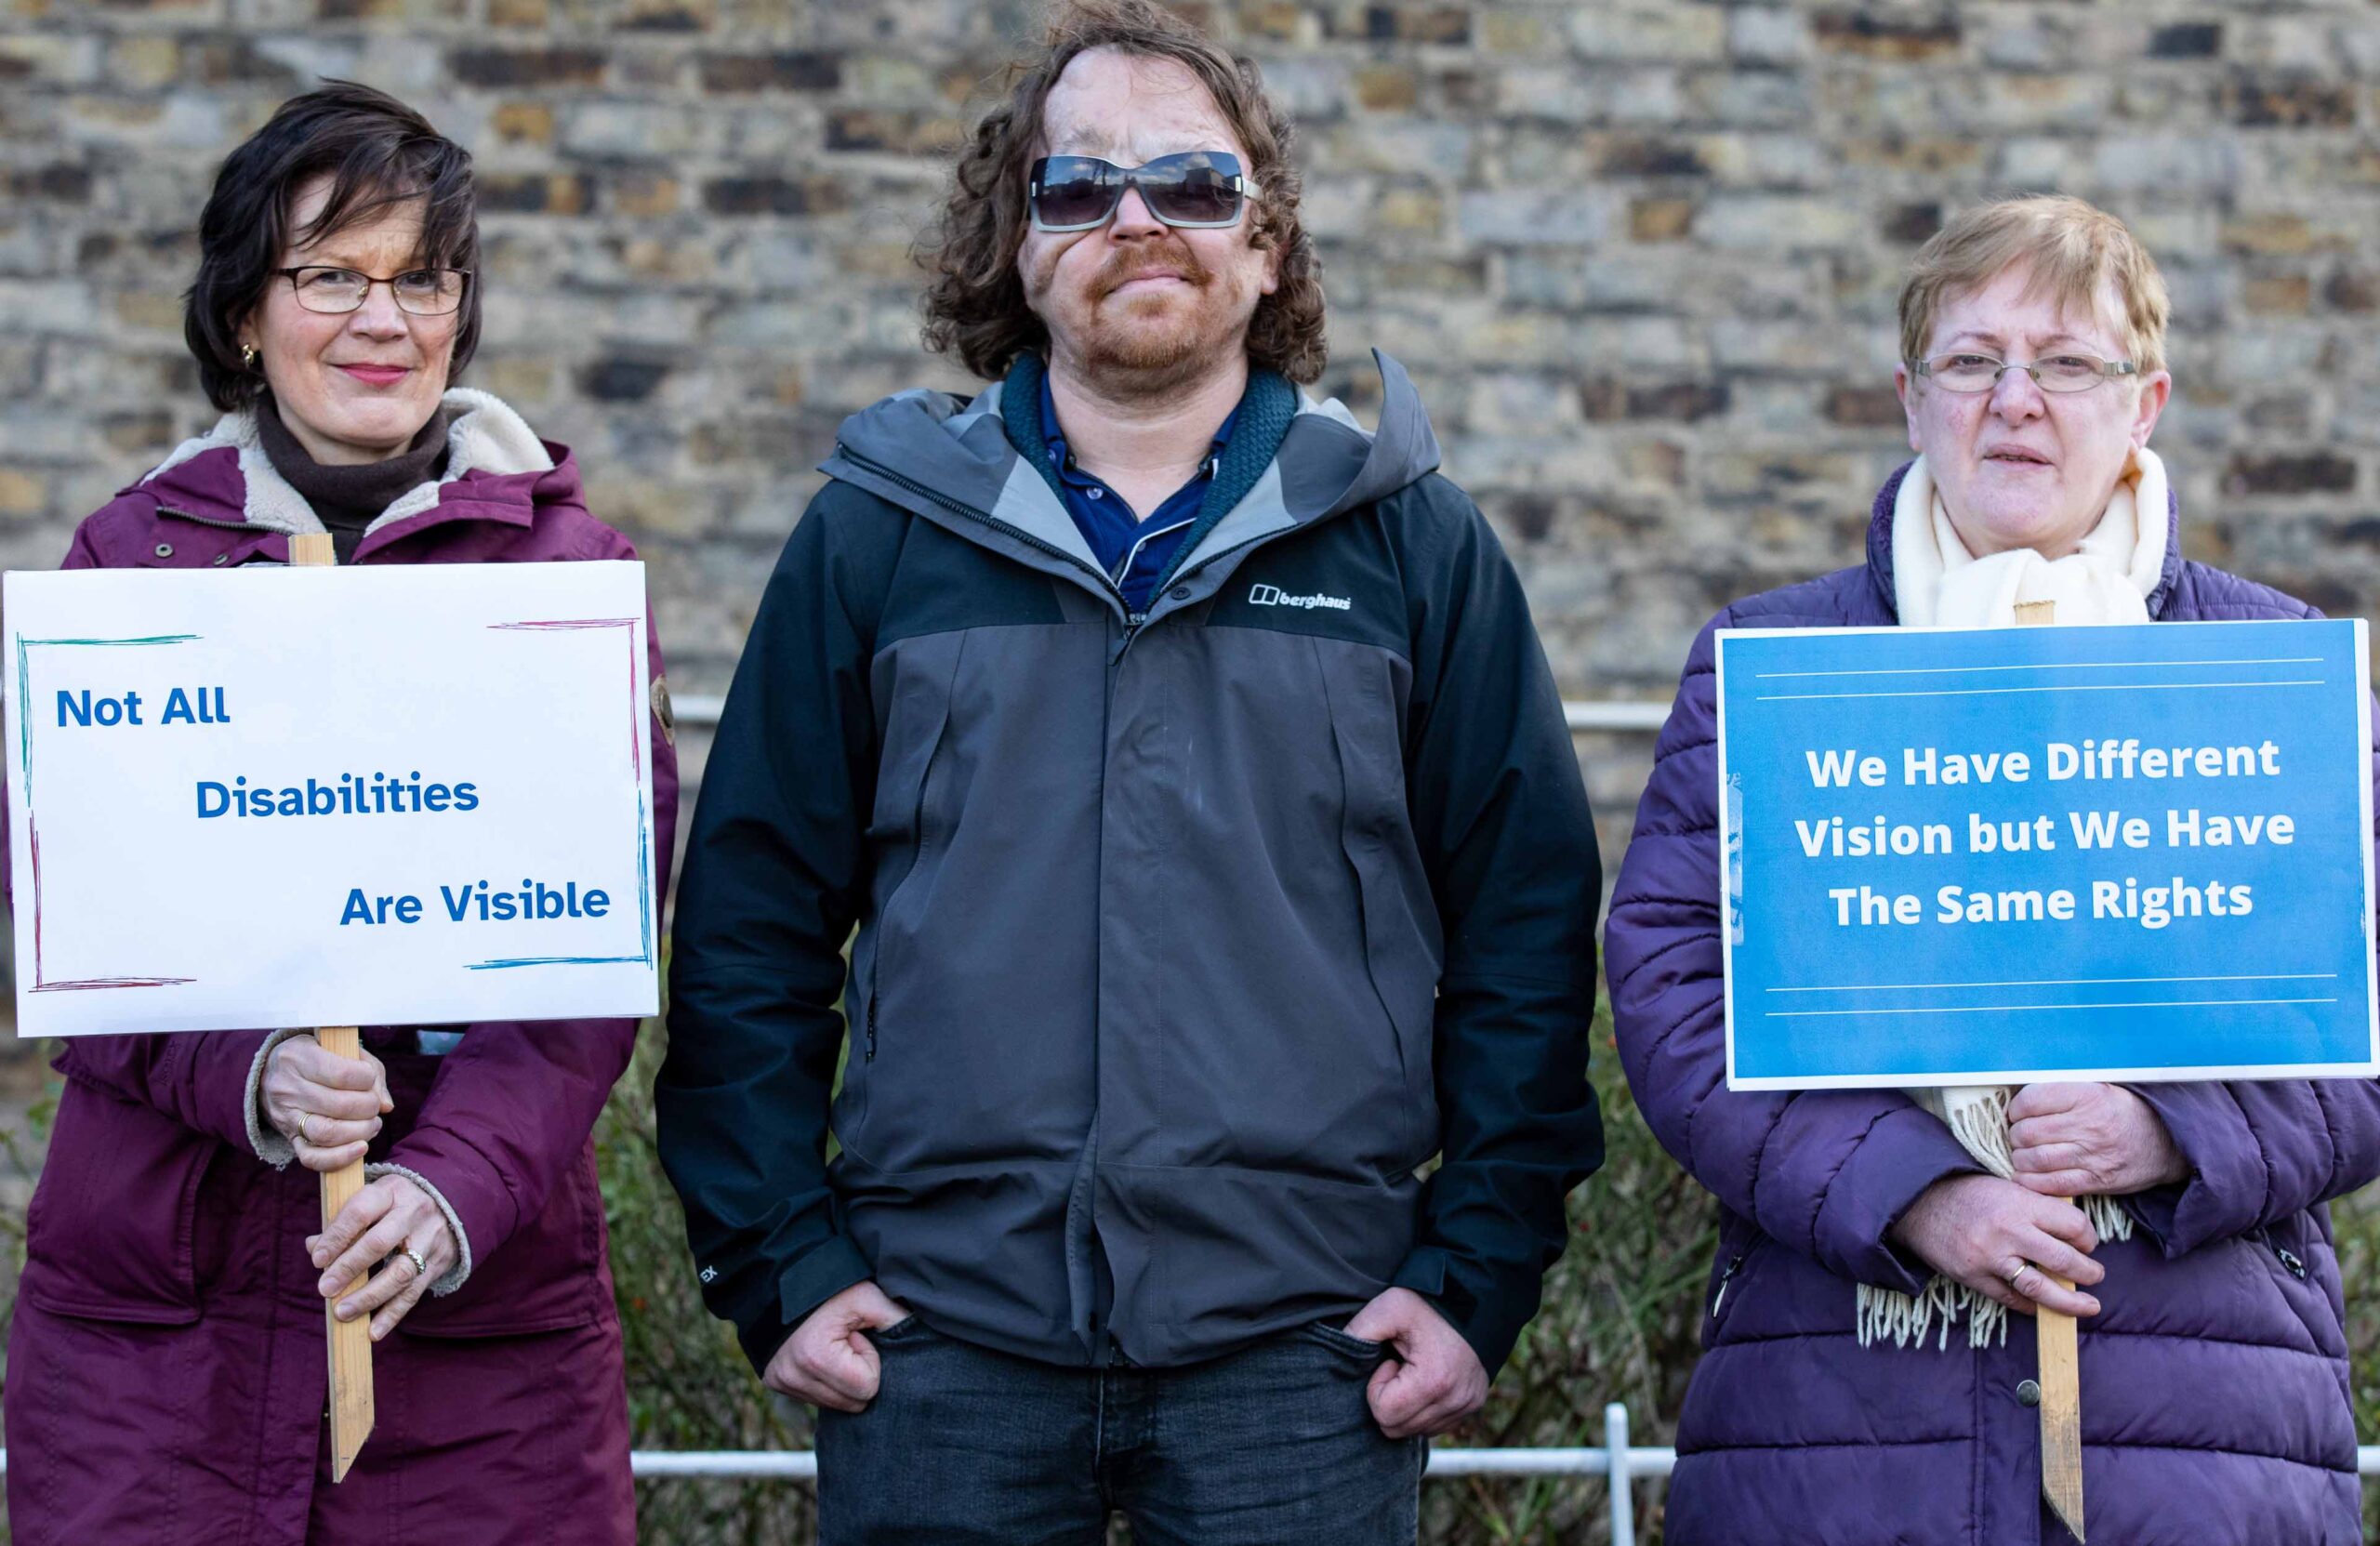 Three NCBI advocates standing together. There is a man in the middle and two women, one either side of him, who are holding signs. The sign on the left reads: Not all disabilities are visible. The sign on the right reads: We have different vision but we have the same rights.